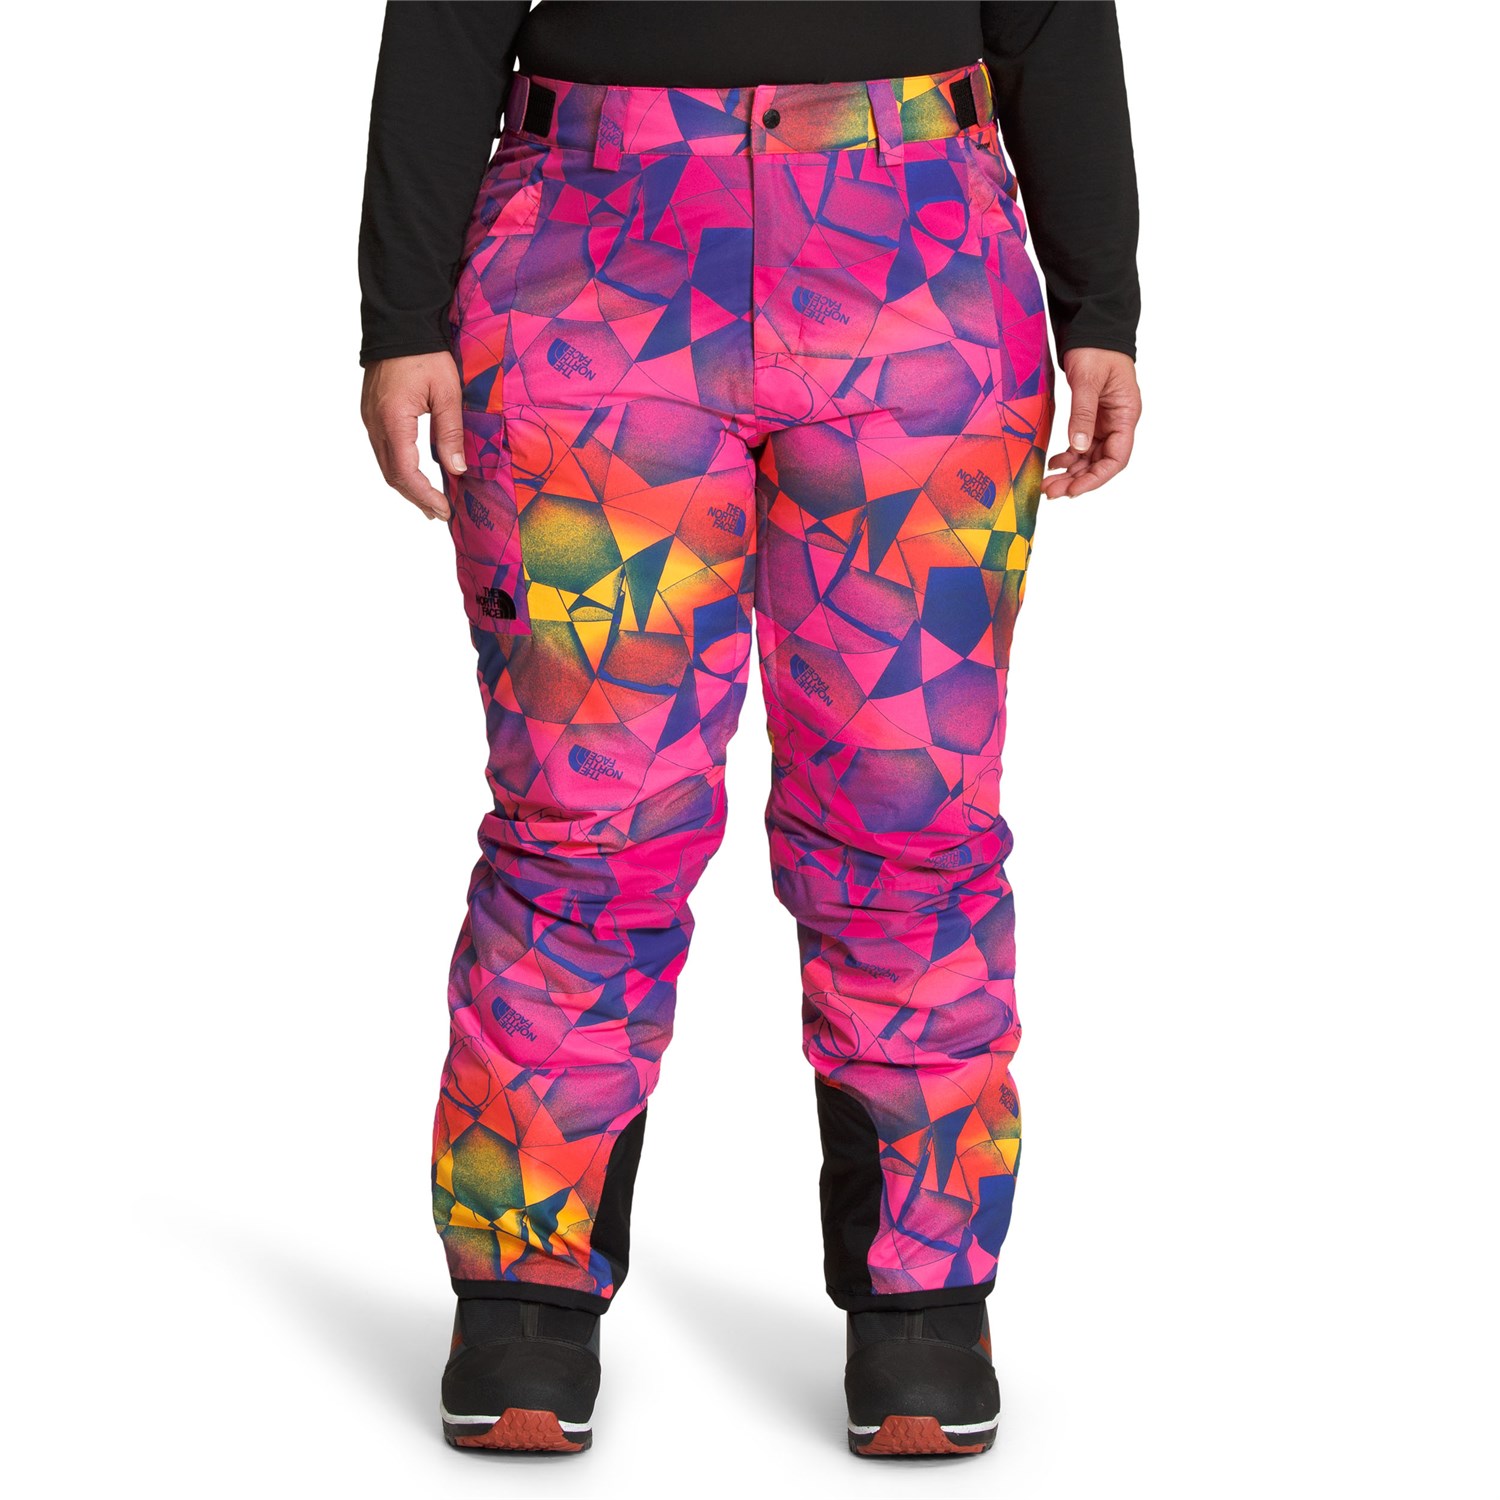 Брюки The North Face Freedom Insulated Plus Tall, цвет Mr. Pink Expedition Print брюки the north face freedom insulated plus short цвет boysenberry